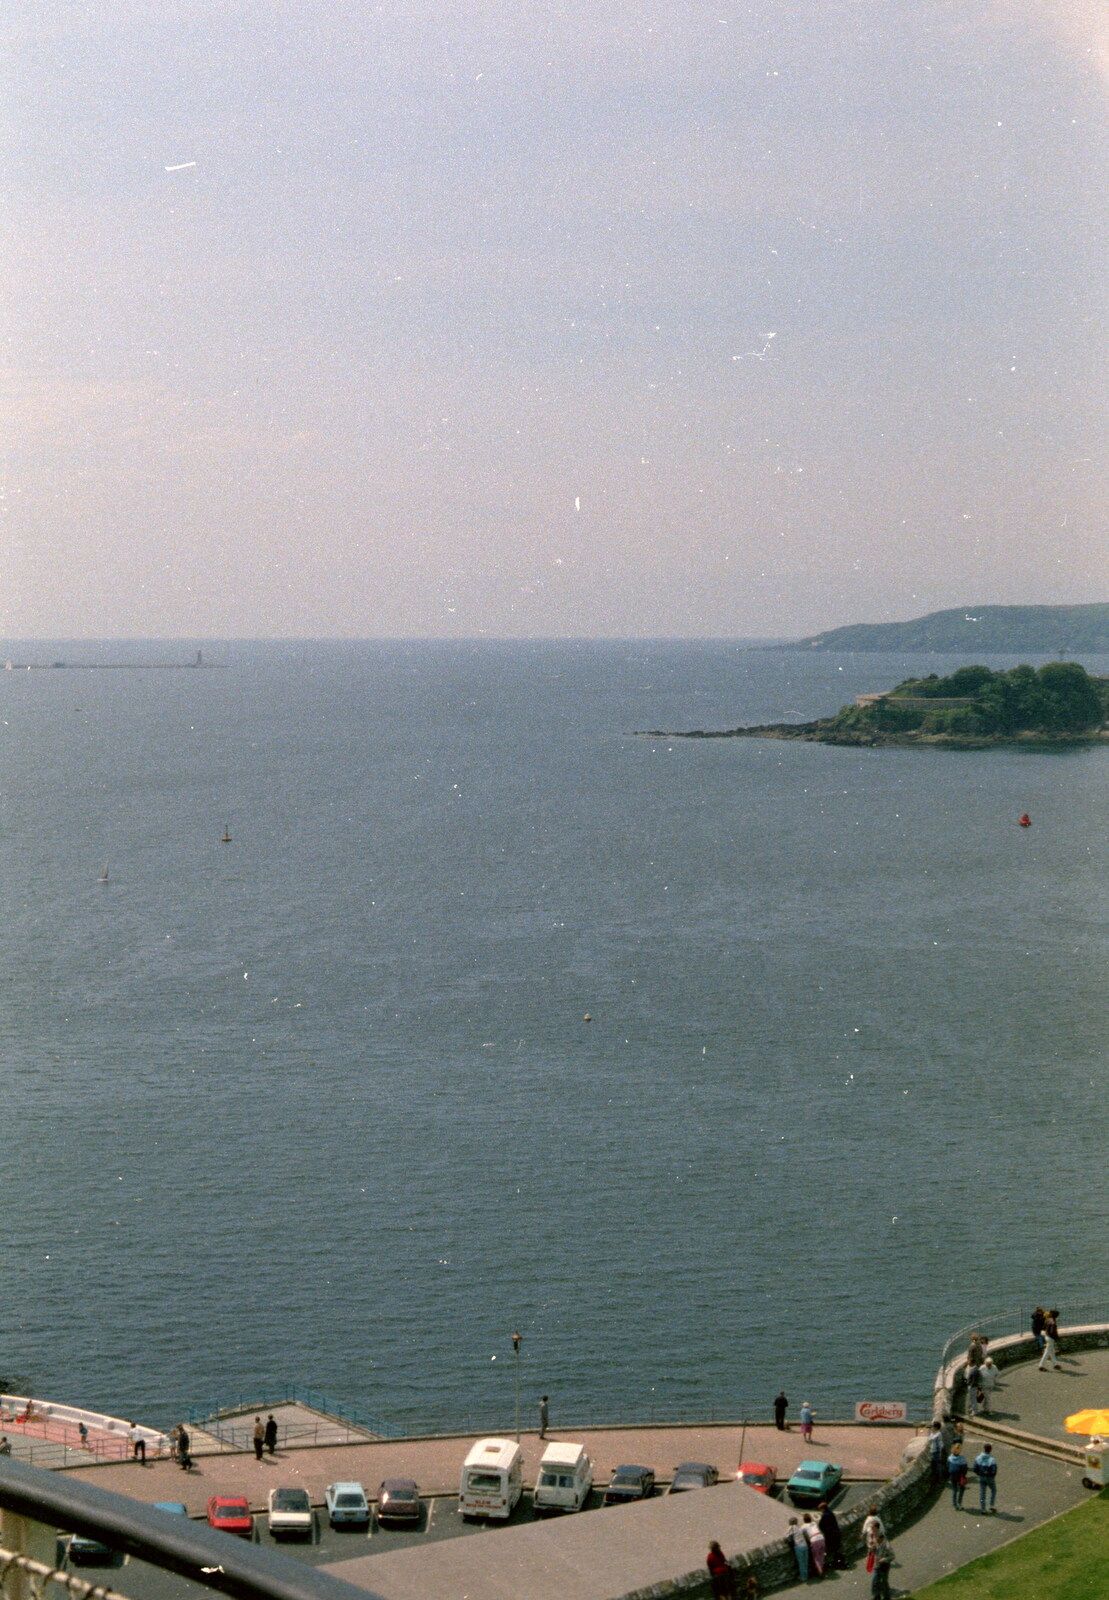 Plymouth Sound and the tip of Drakes Island from Uni: A Plymouth Hoe Panorama, Plymouth, Devon - 7th May 1986